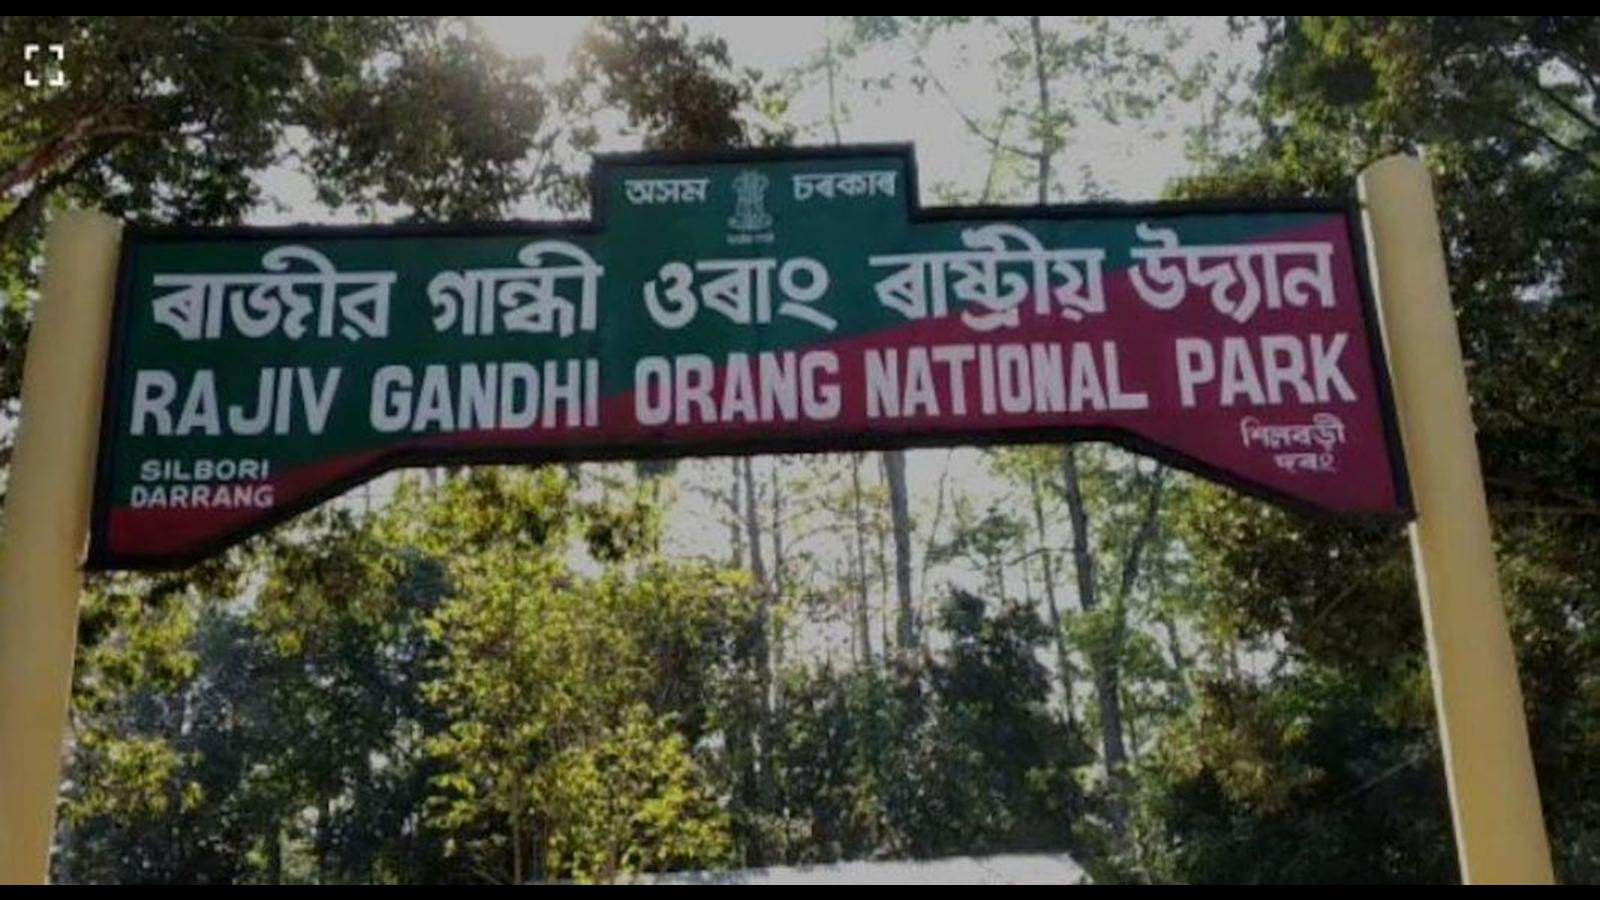 Assam cabinet decides to remove Rajiv Gandhi&#39;s name from Orang national park  | Latest News India - Hindustan Times